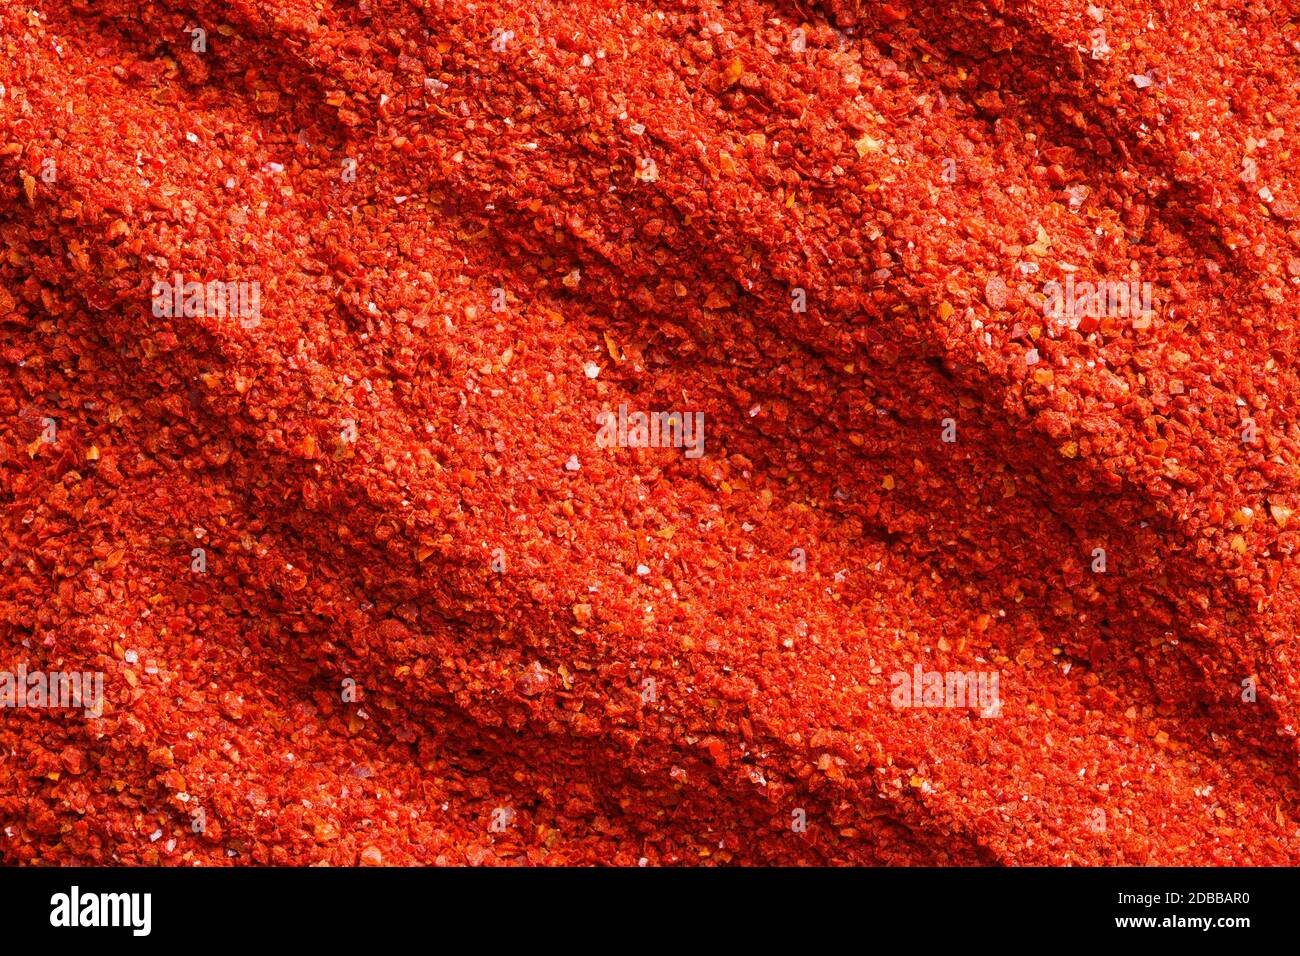 close up of red chili powder spice food background Stock Photo